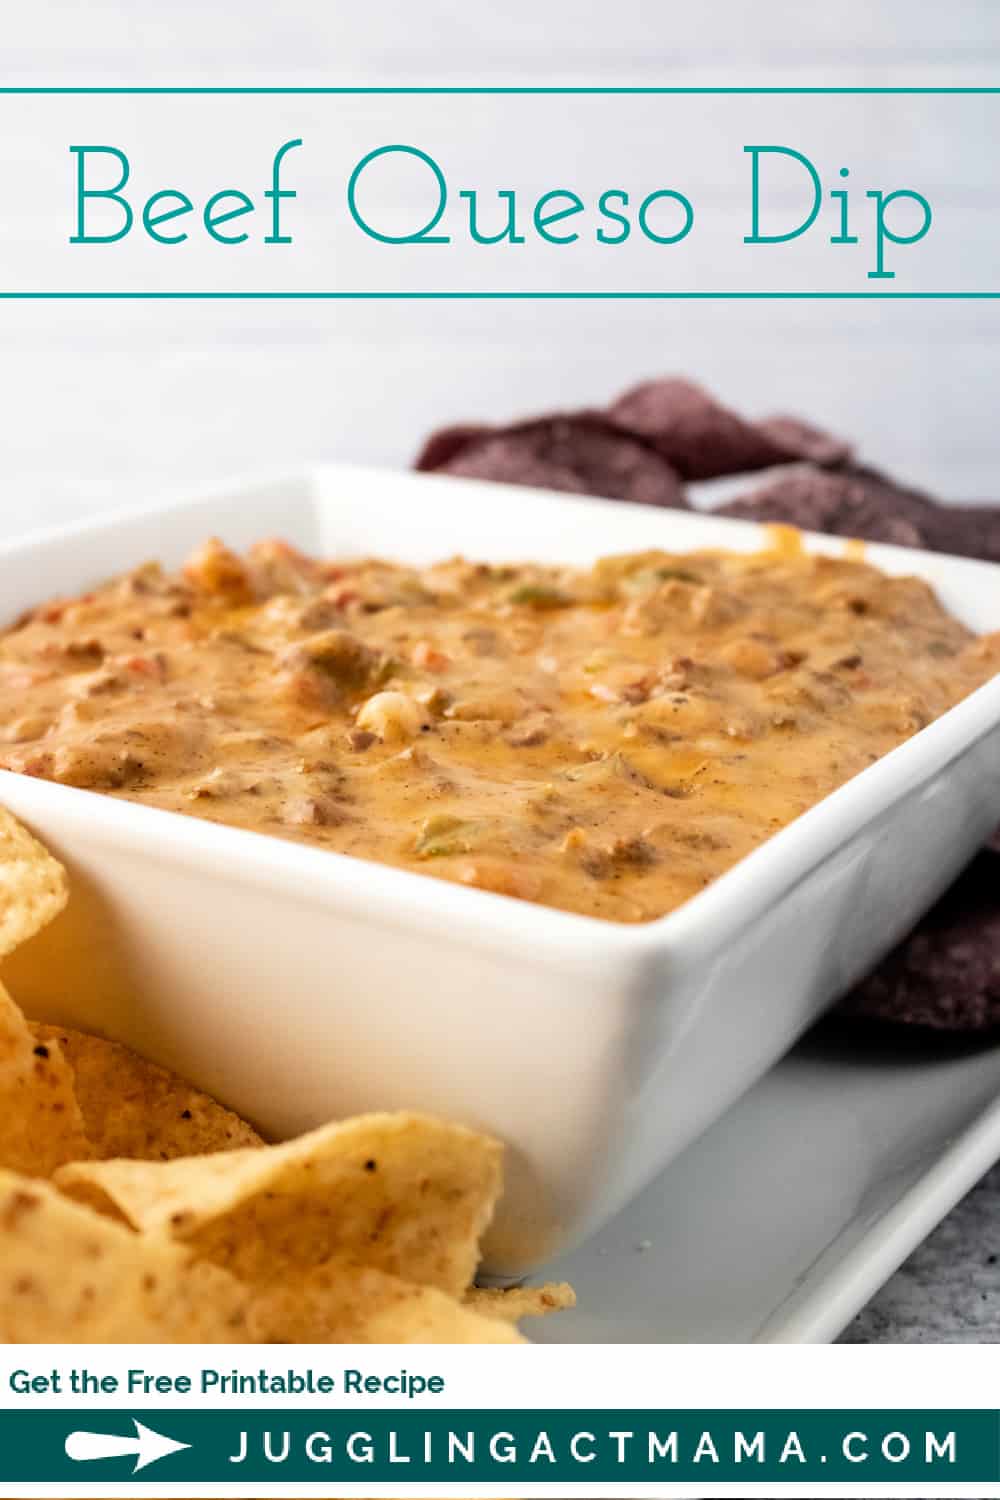 Beef Queso Dip combines a beef mixture with melted cheese and spices. For perfect party food, you need this delicious cheesy appetizer. via @jugglingactmama